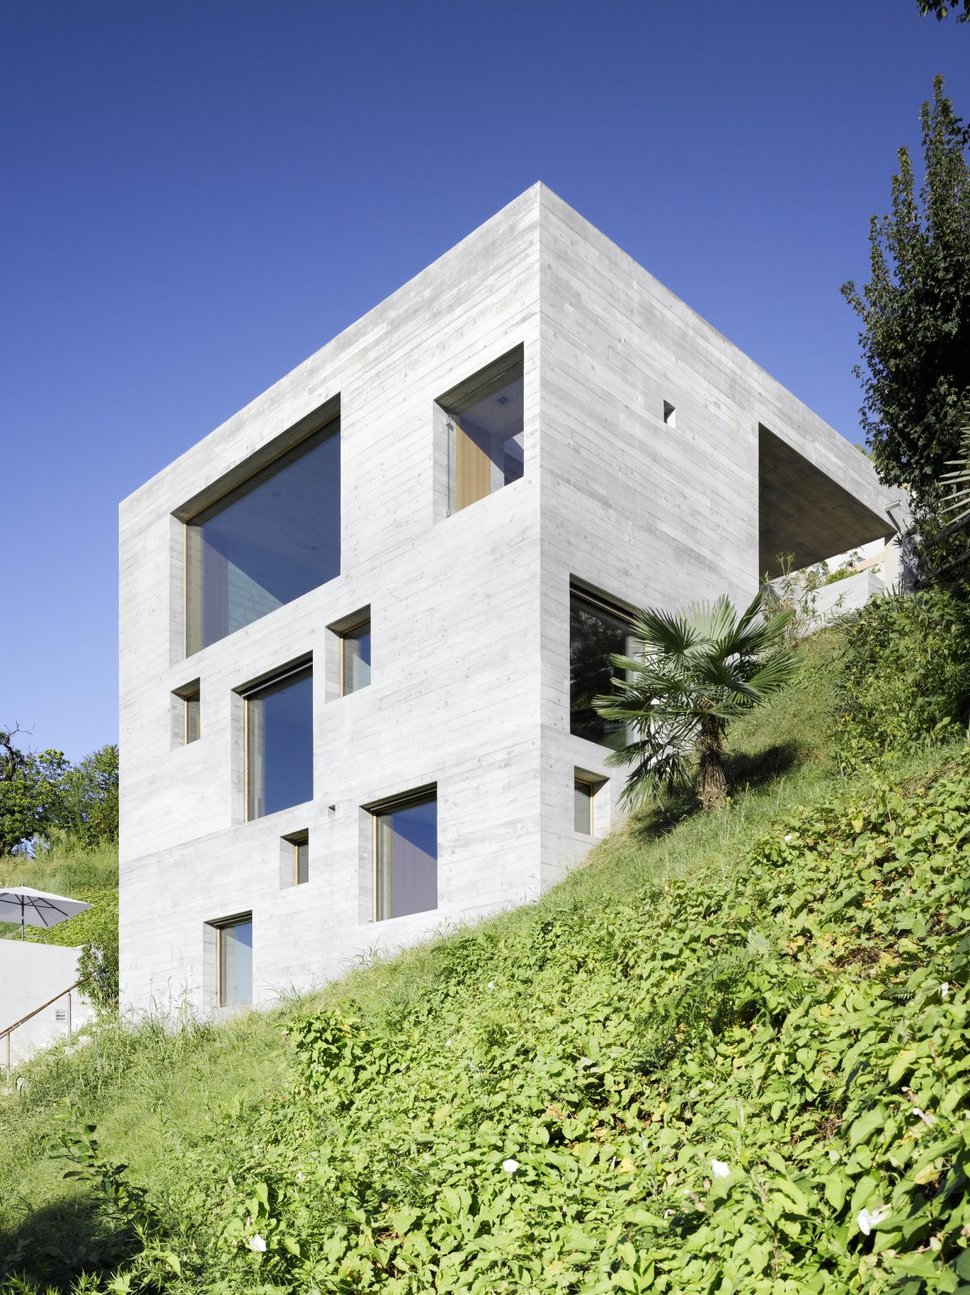 minamalist-concretehome-showcases-stunning-views-and-contemporaryliving-1-exterior.jpg